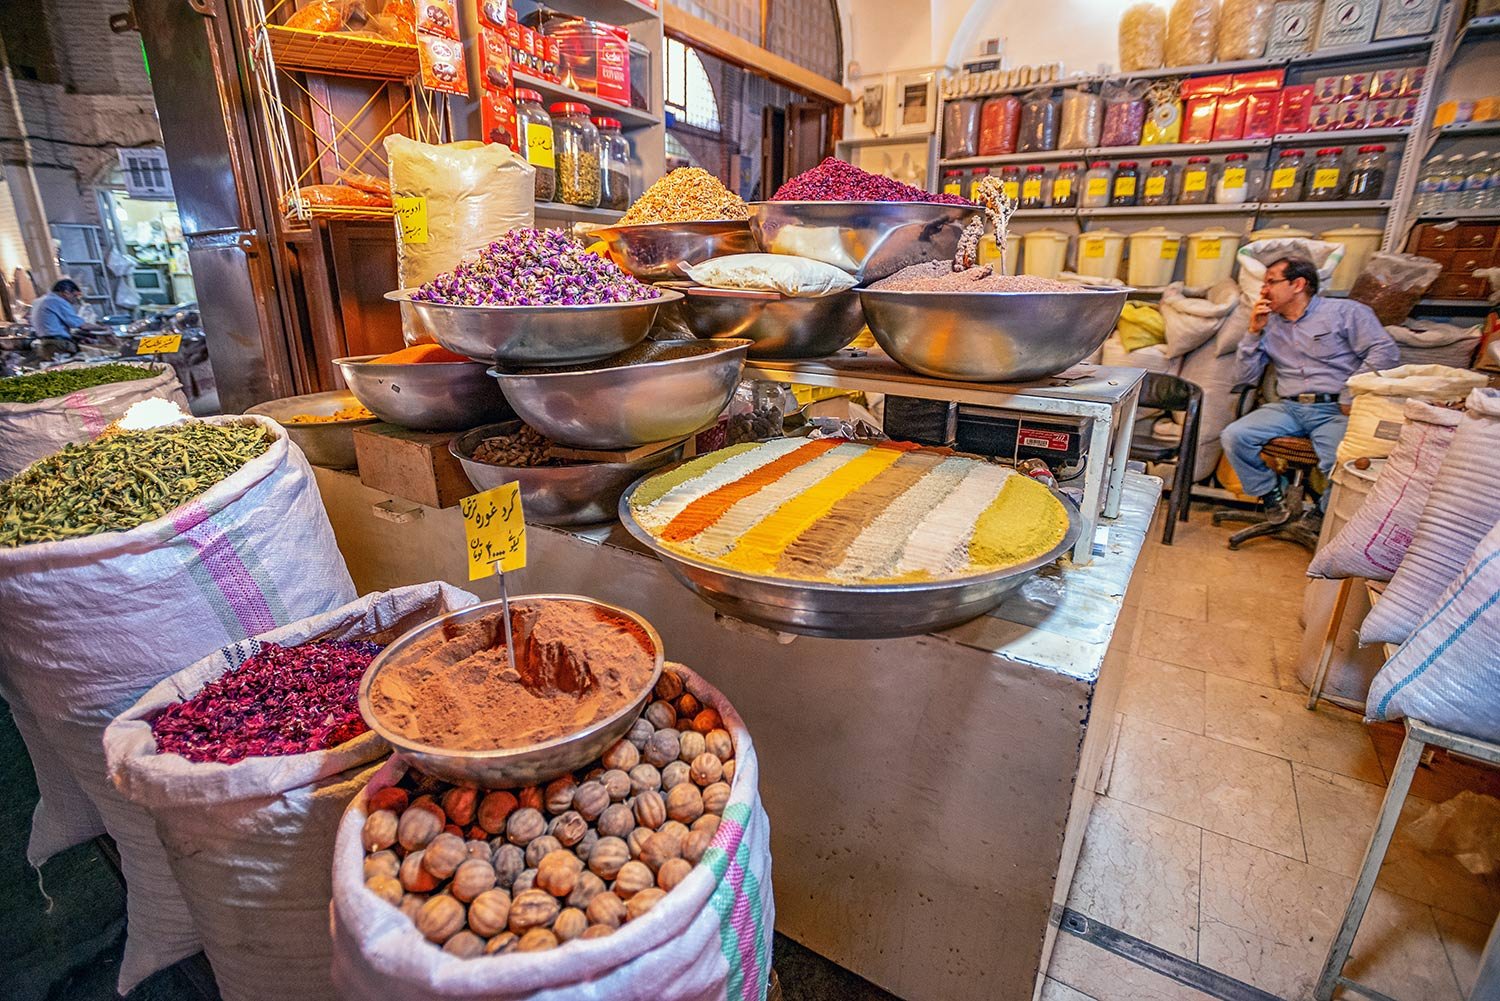 Kerman's Grand Bazaar A Guide To Iran's Most Iconic Market